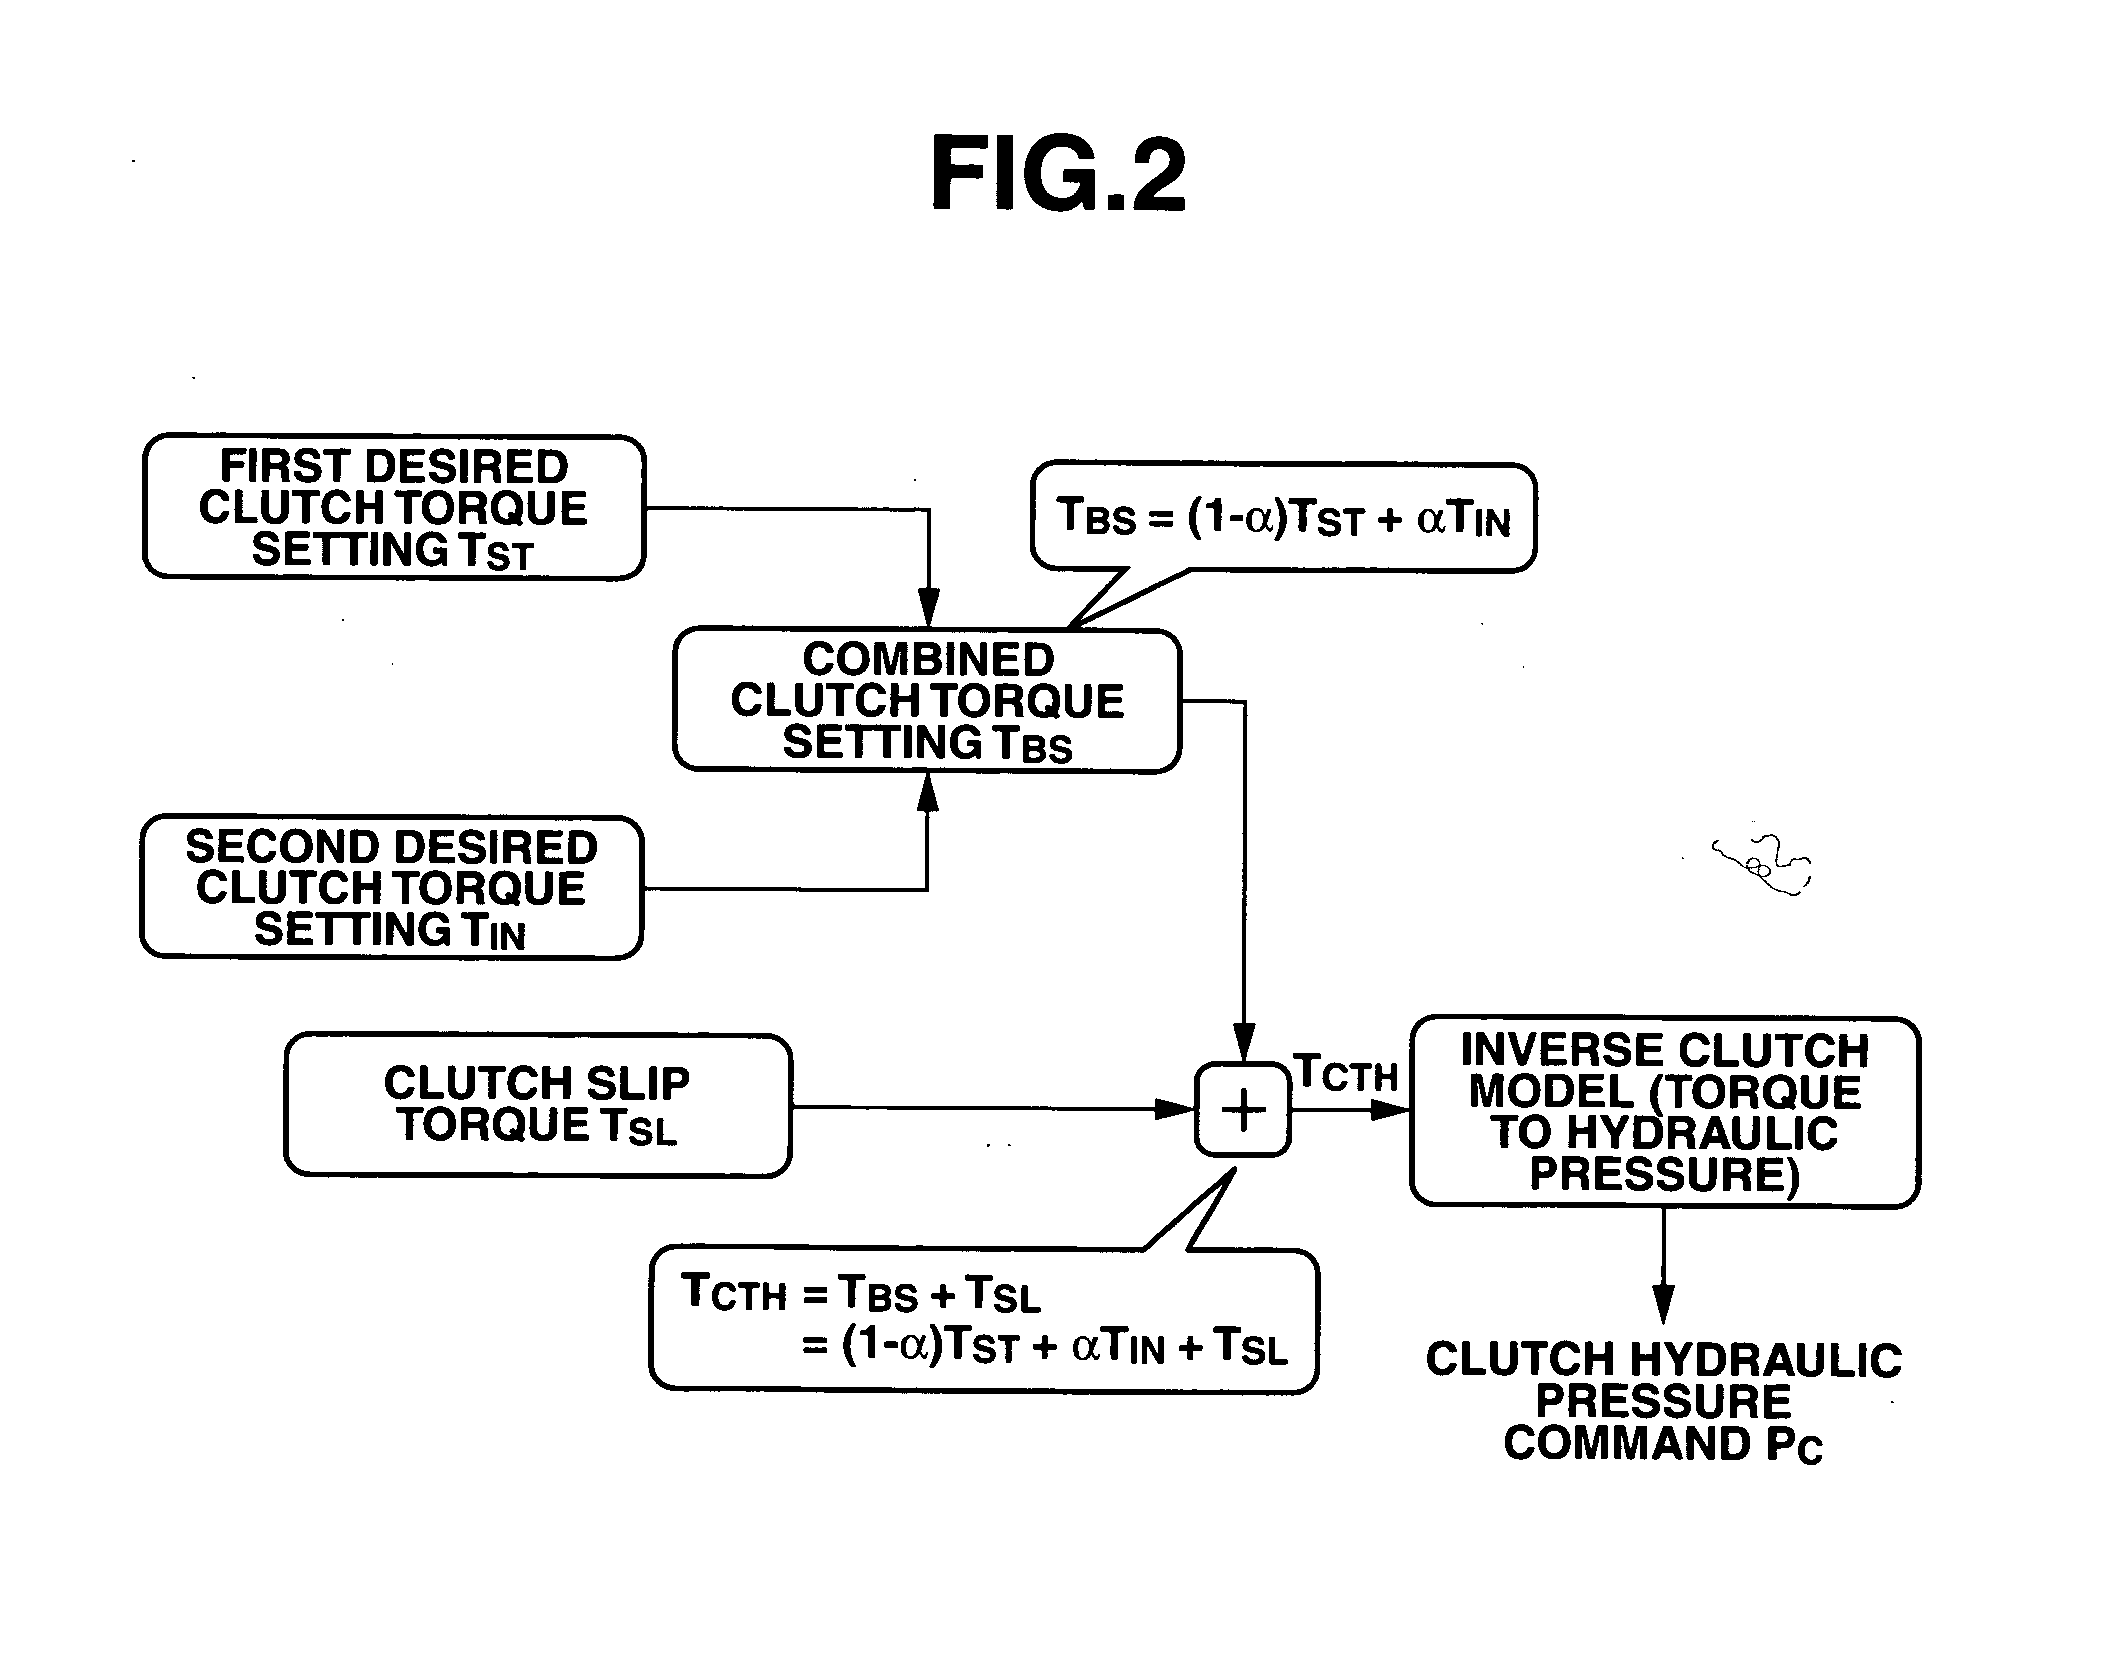 Clutch control apparatus and method